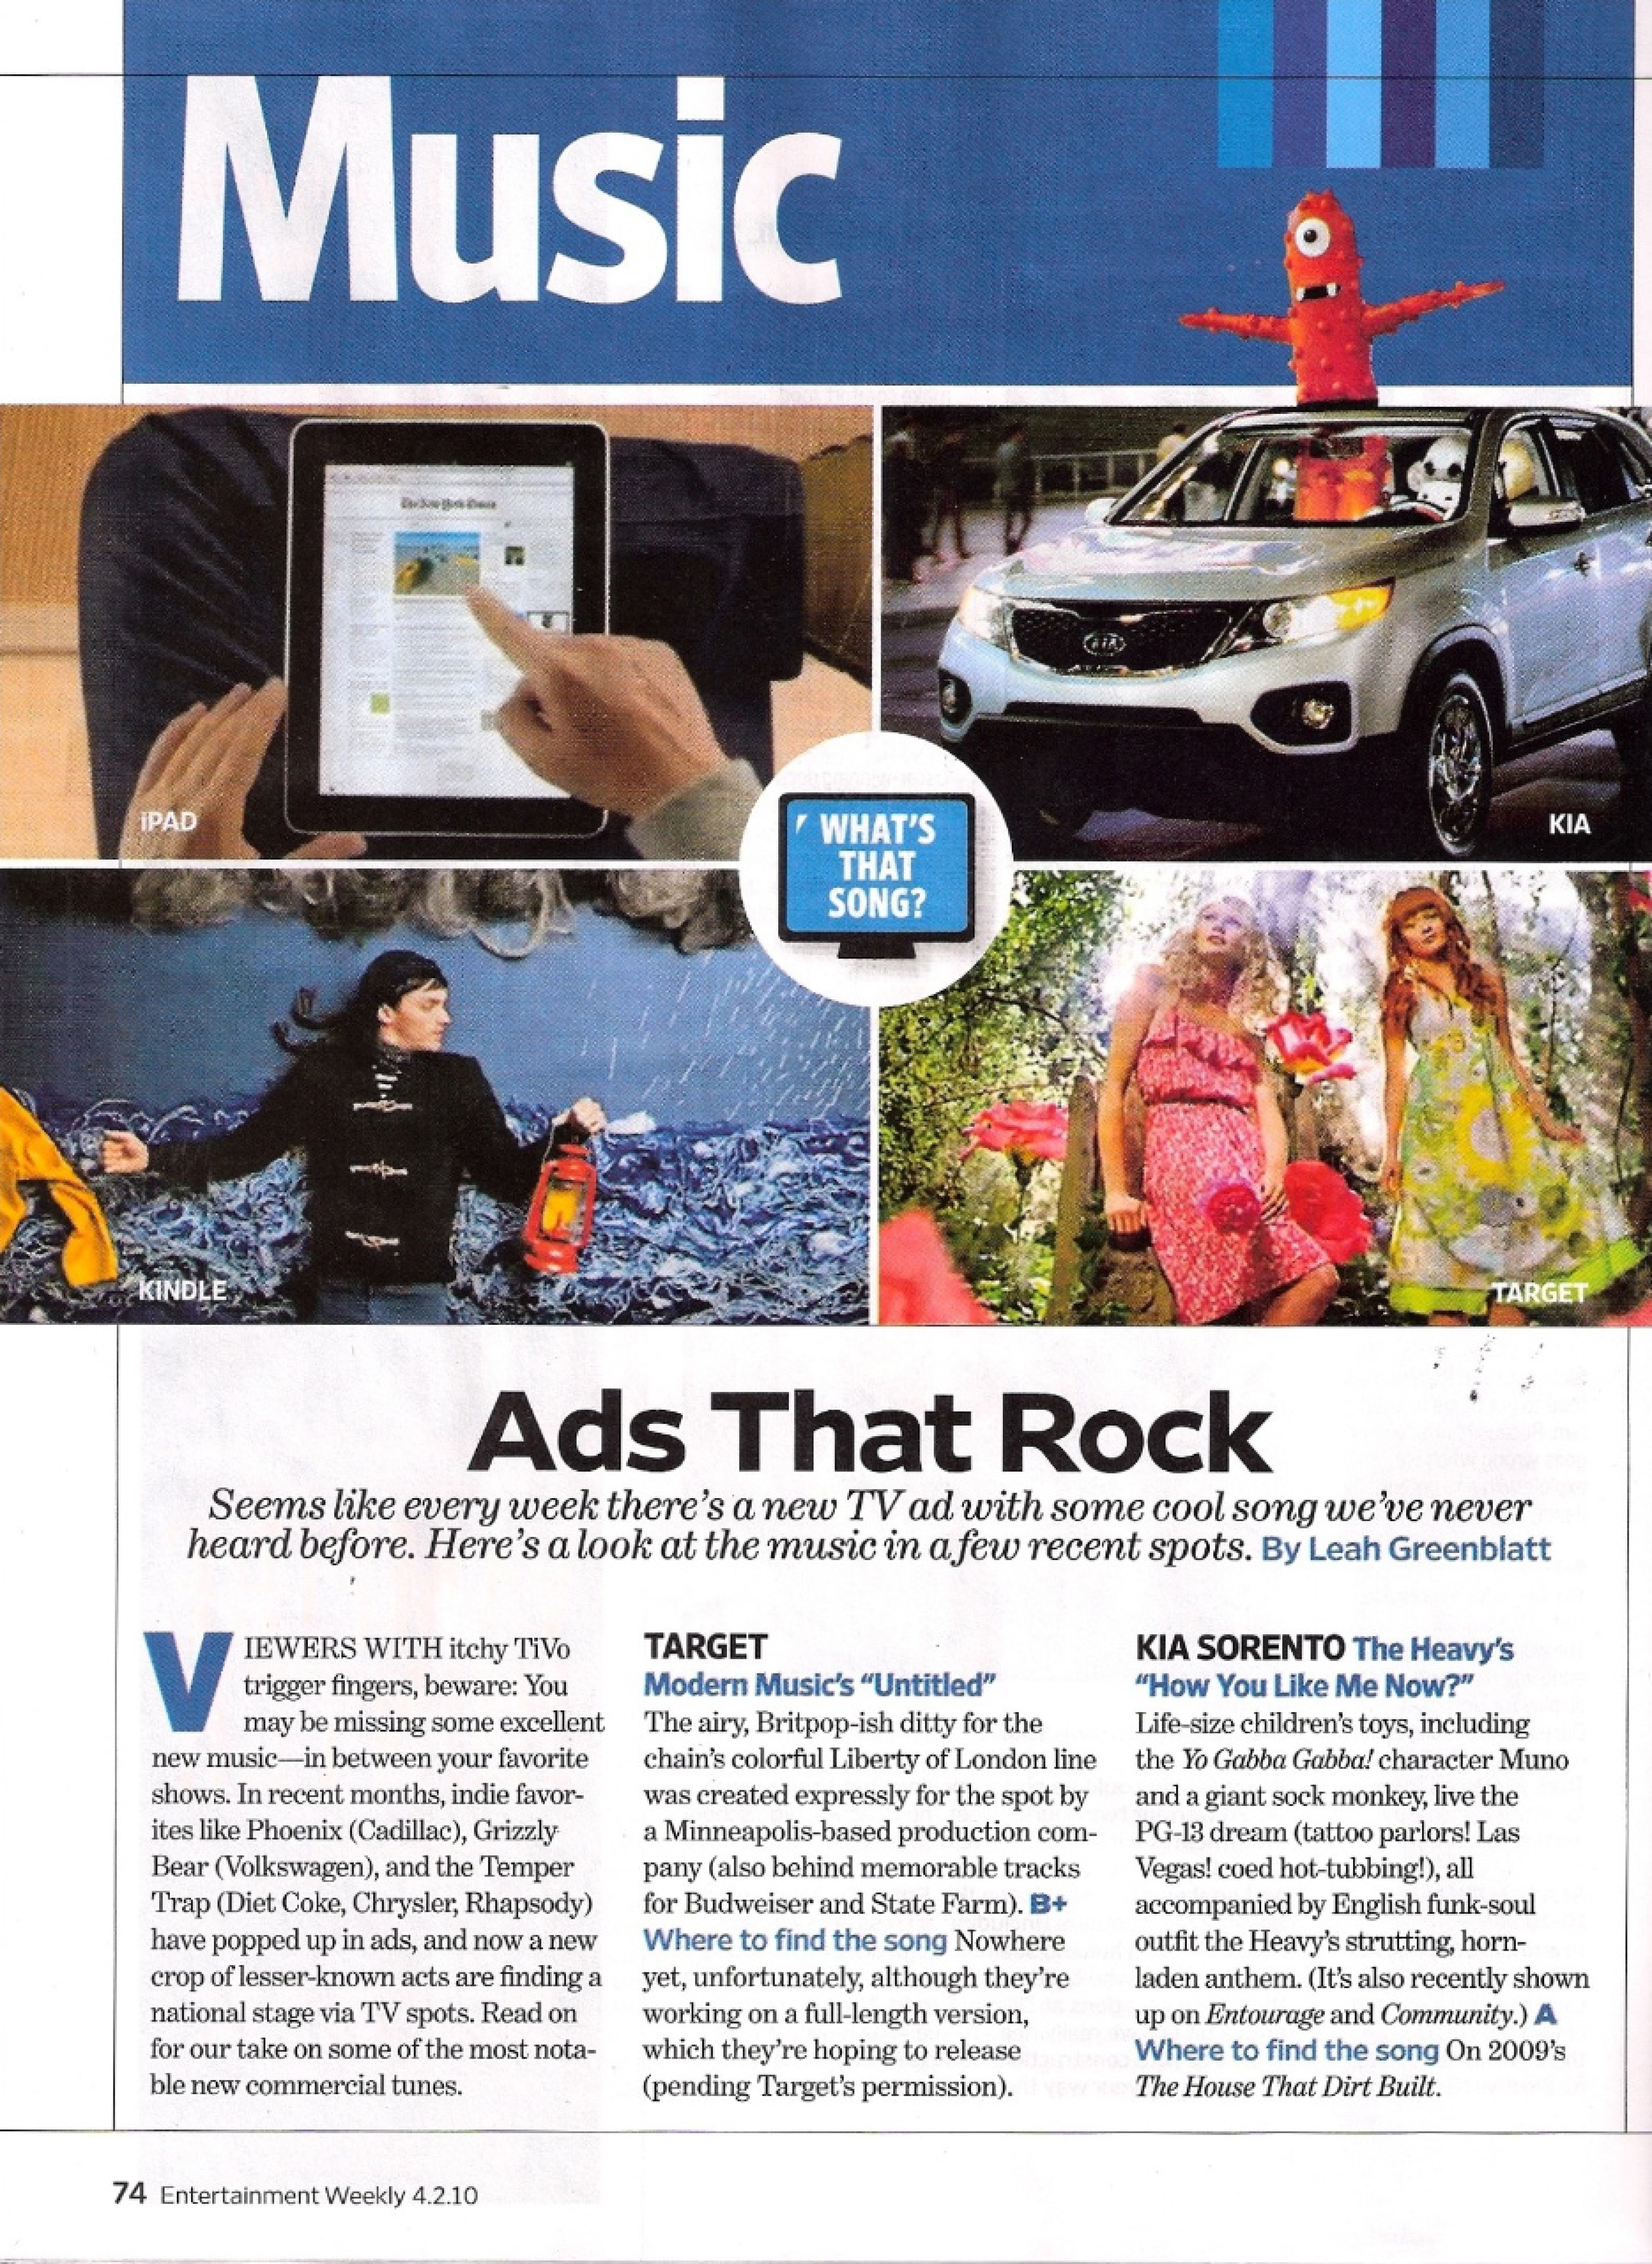 Entertainment Weekly Apr 2-2010 Ads That Rock-1.jpg